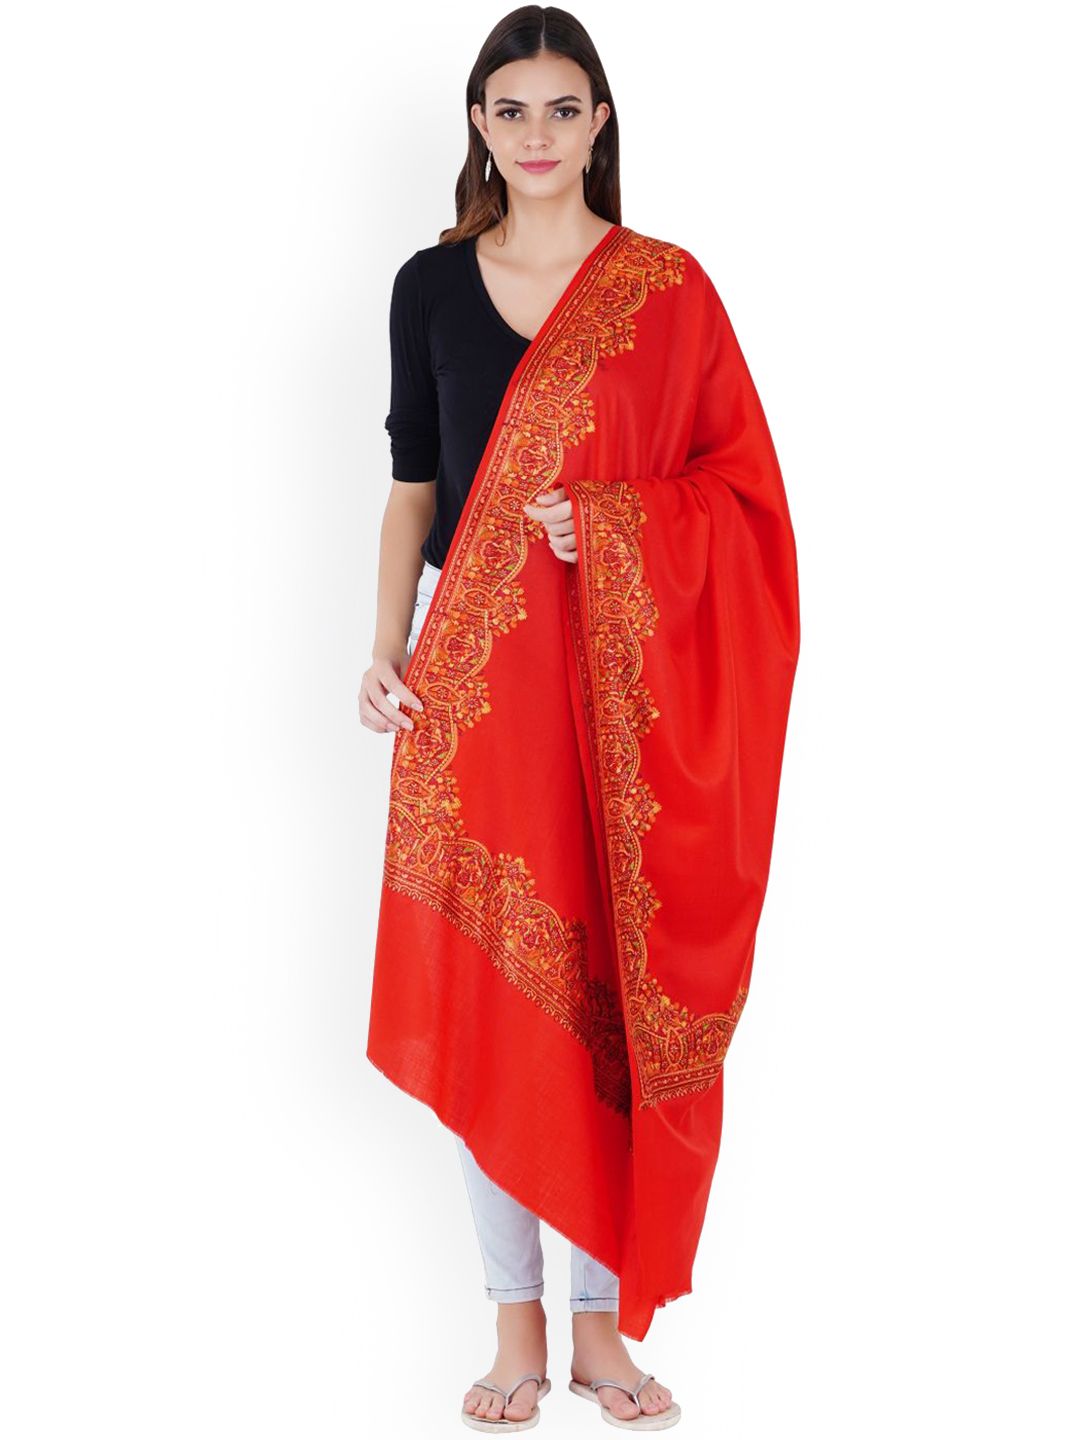 MUFFLY Red Printed Pure Wool Shawl Price in India